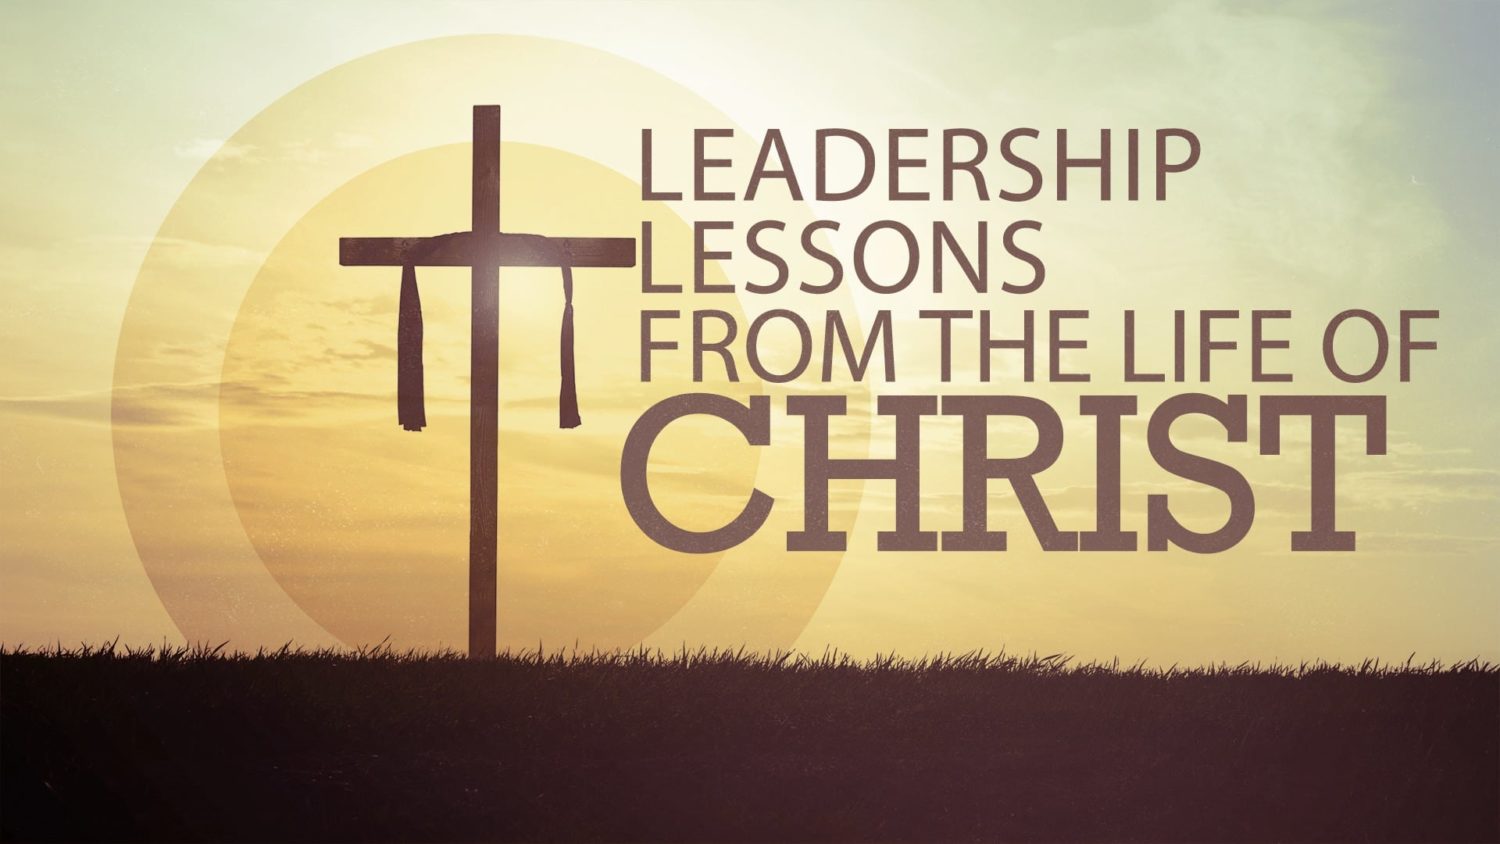 Featured image for “Leadership Lessons from the Life of Christ”